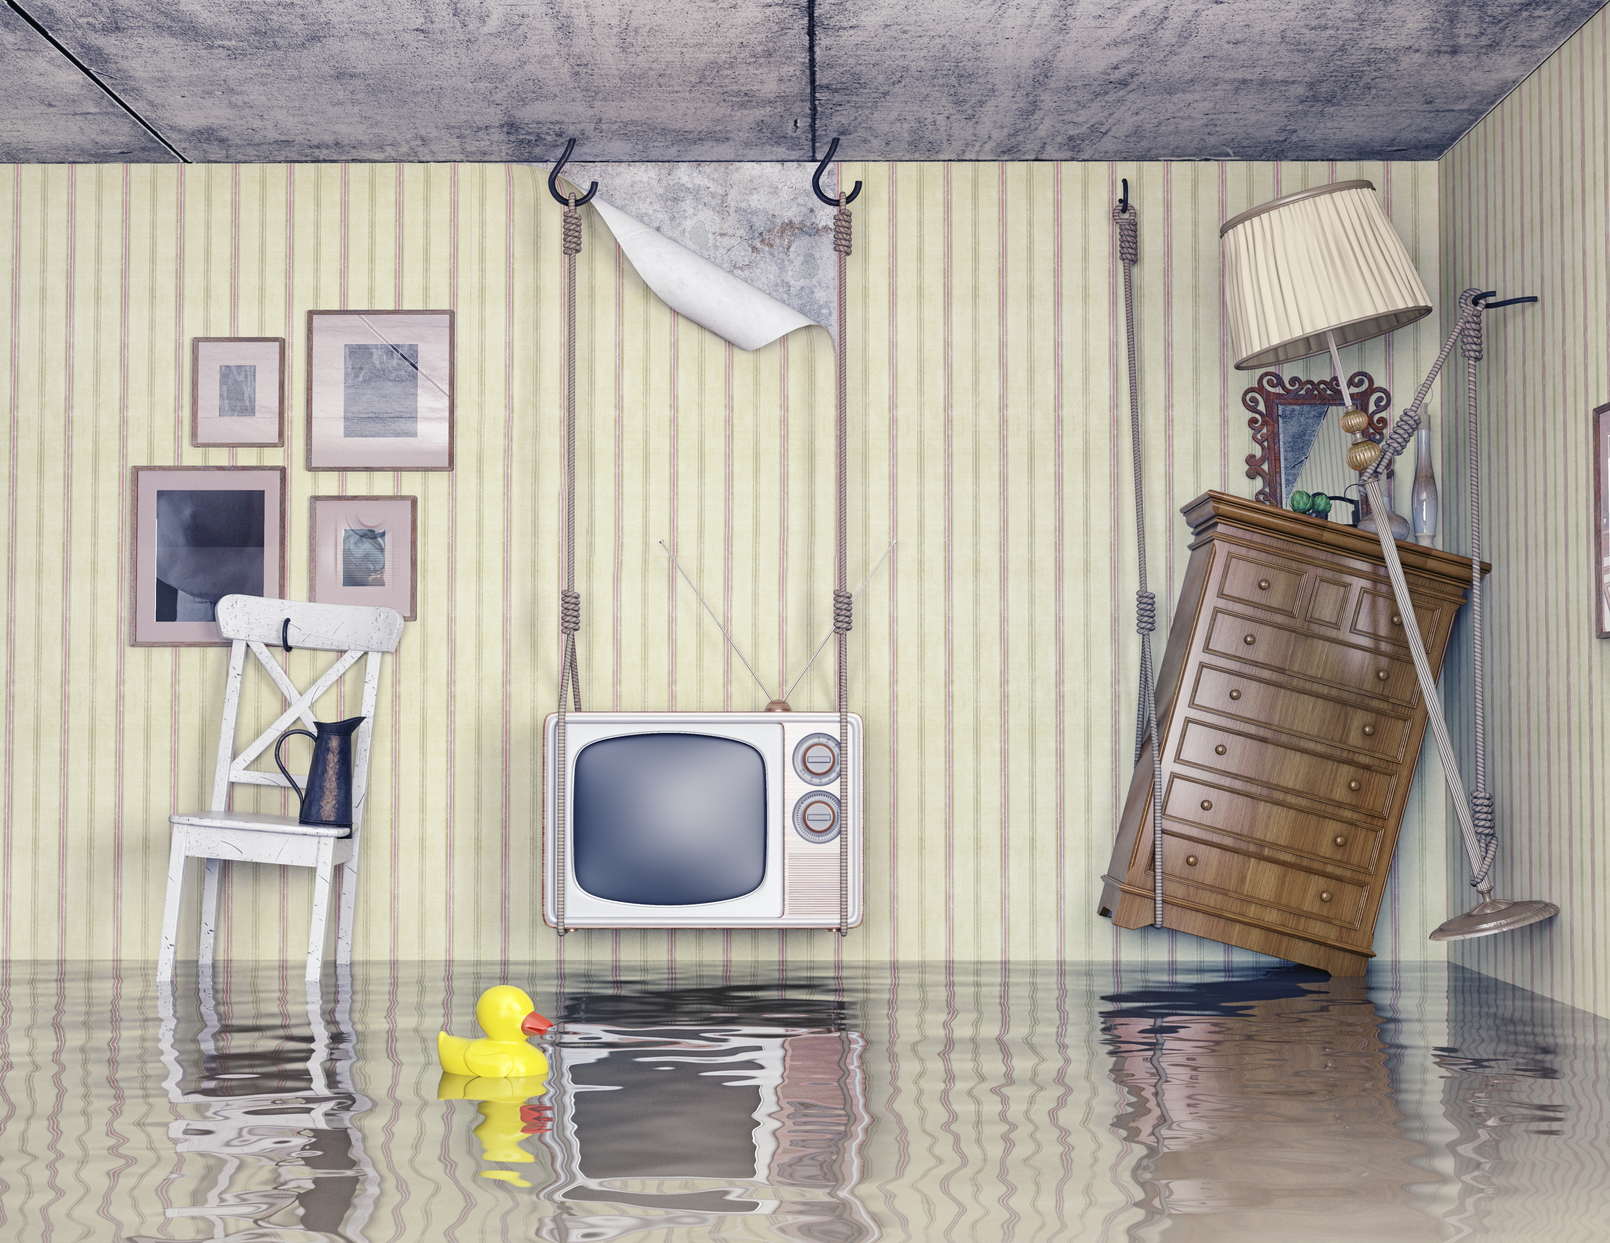 Water Damage Restoration – Is DIY’ing The Right Move?